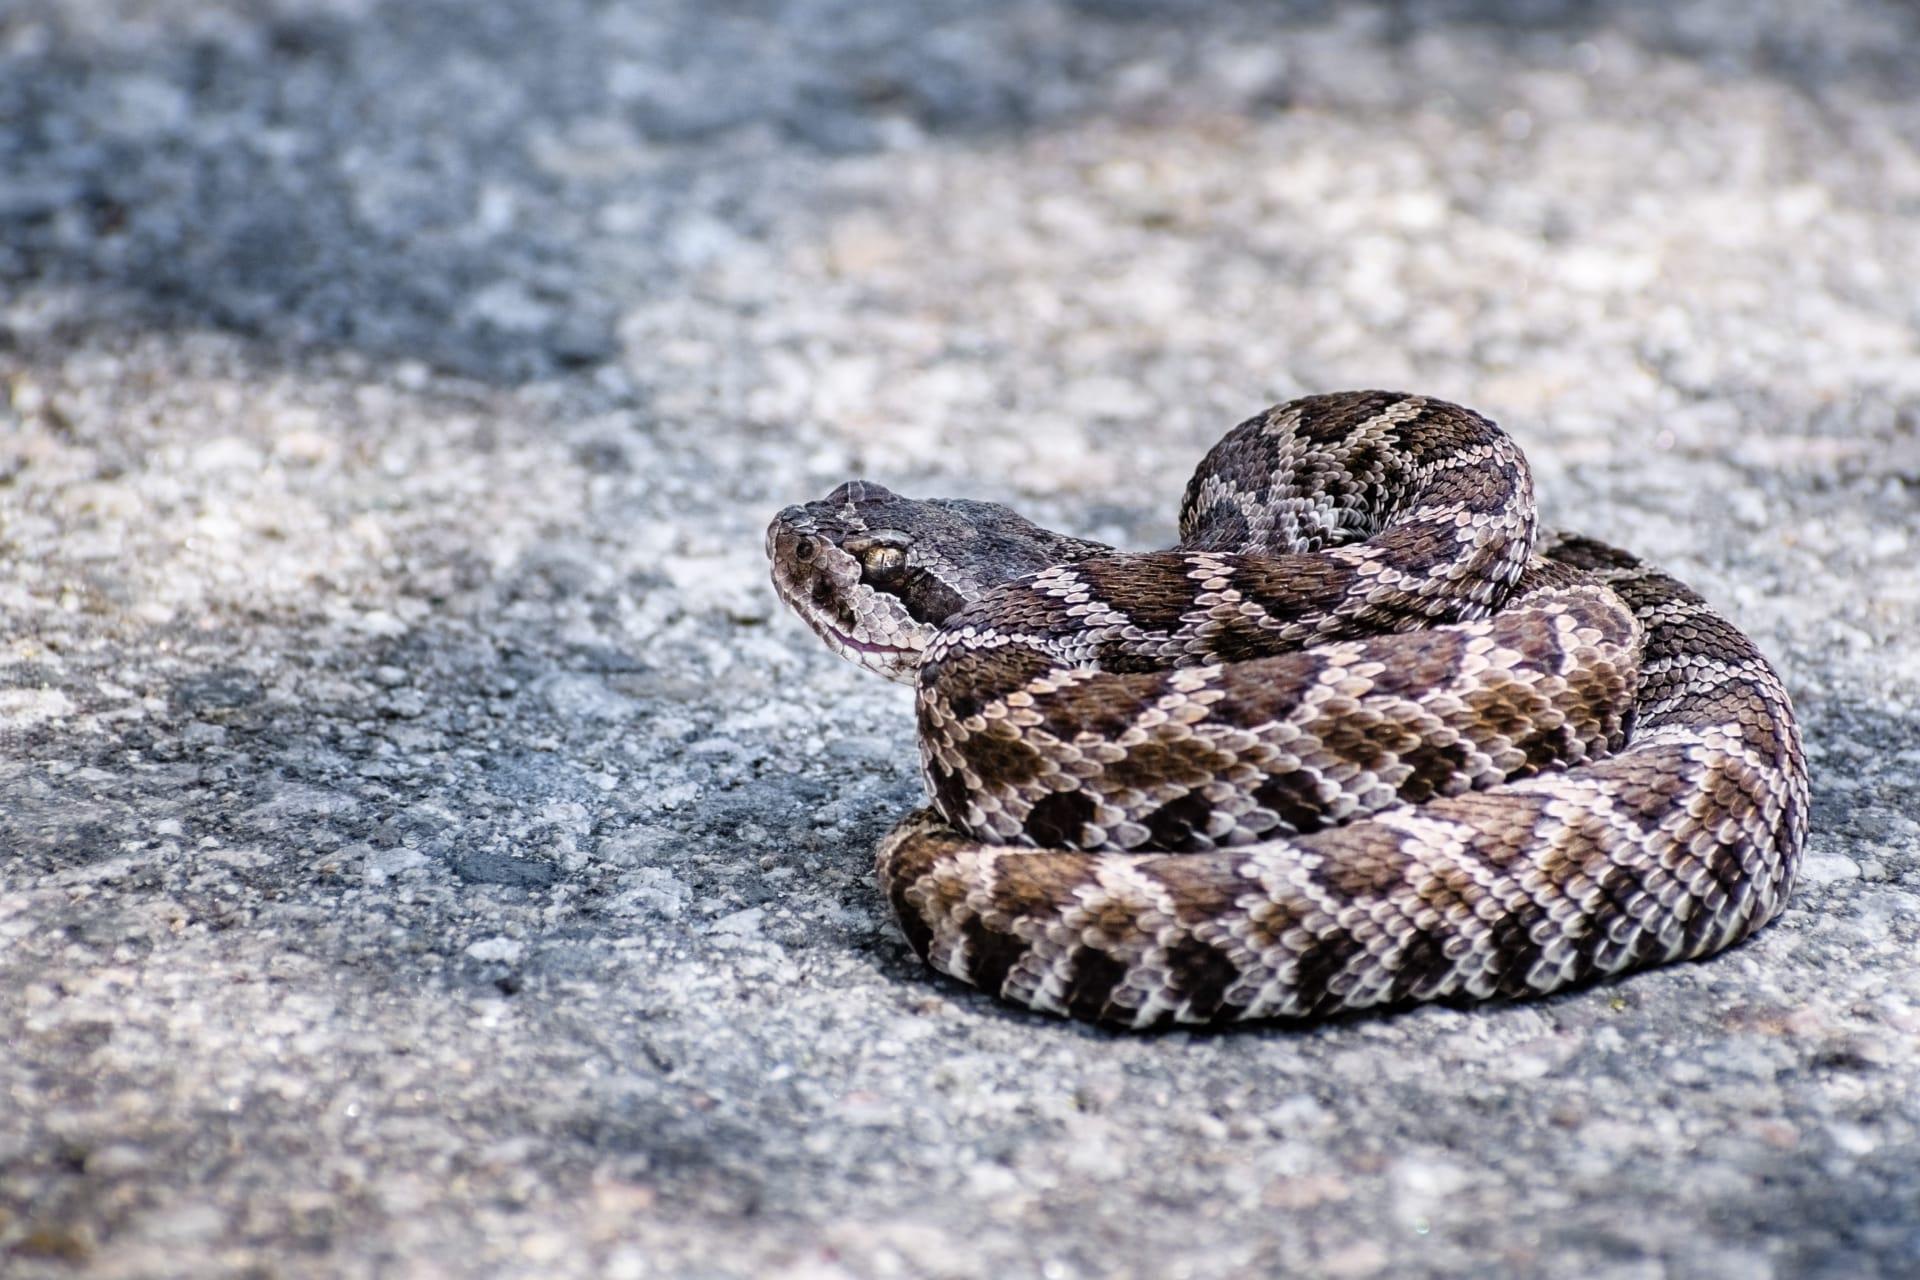 Rattlesnake pictures